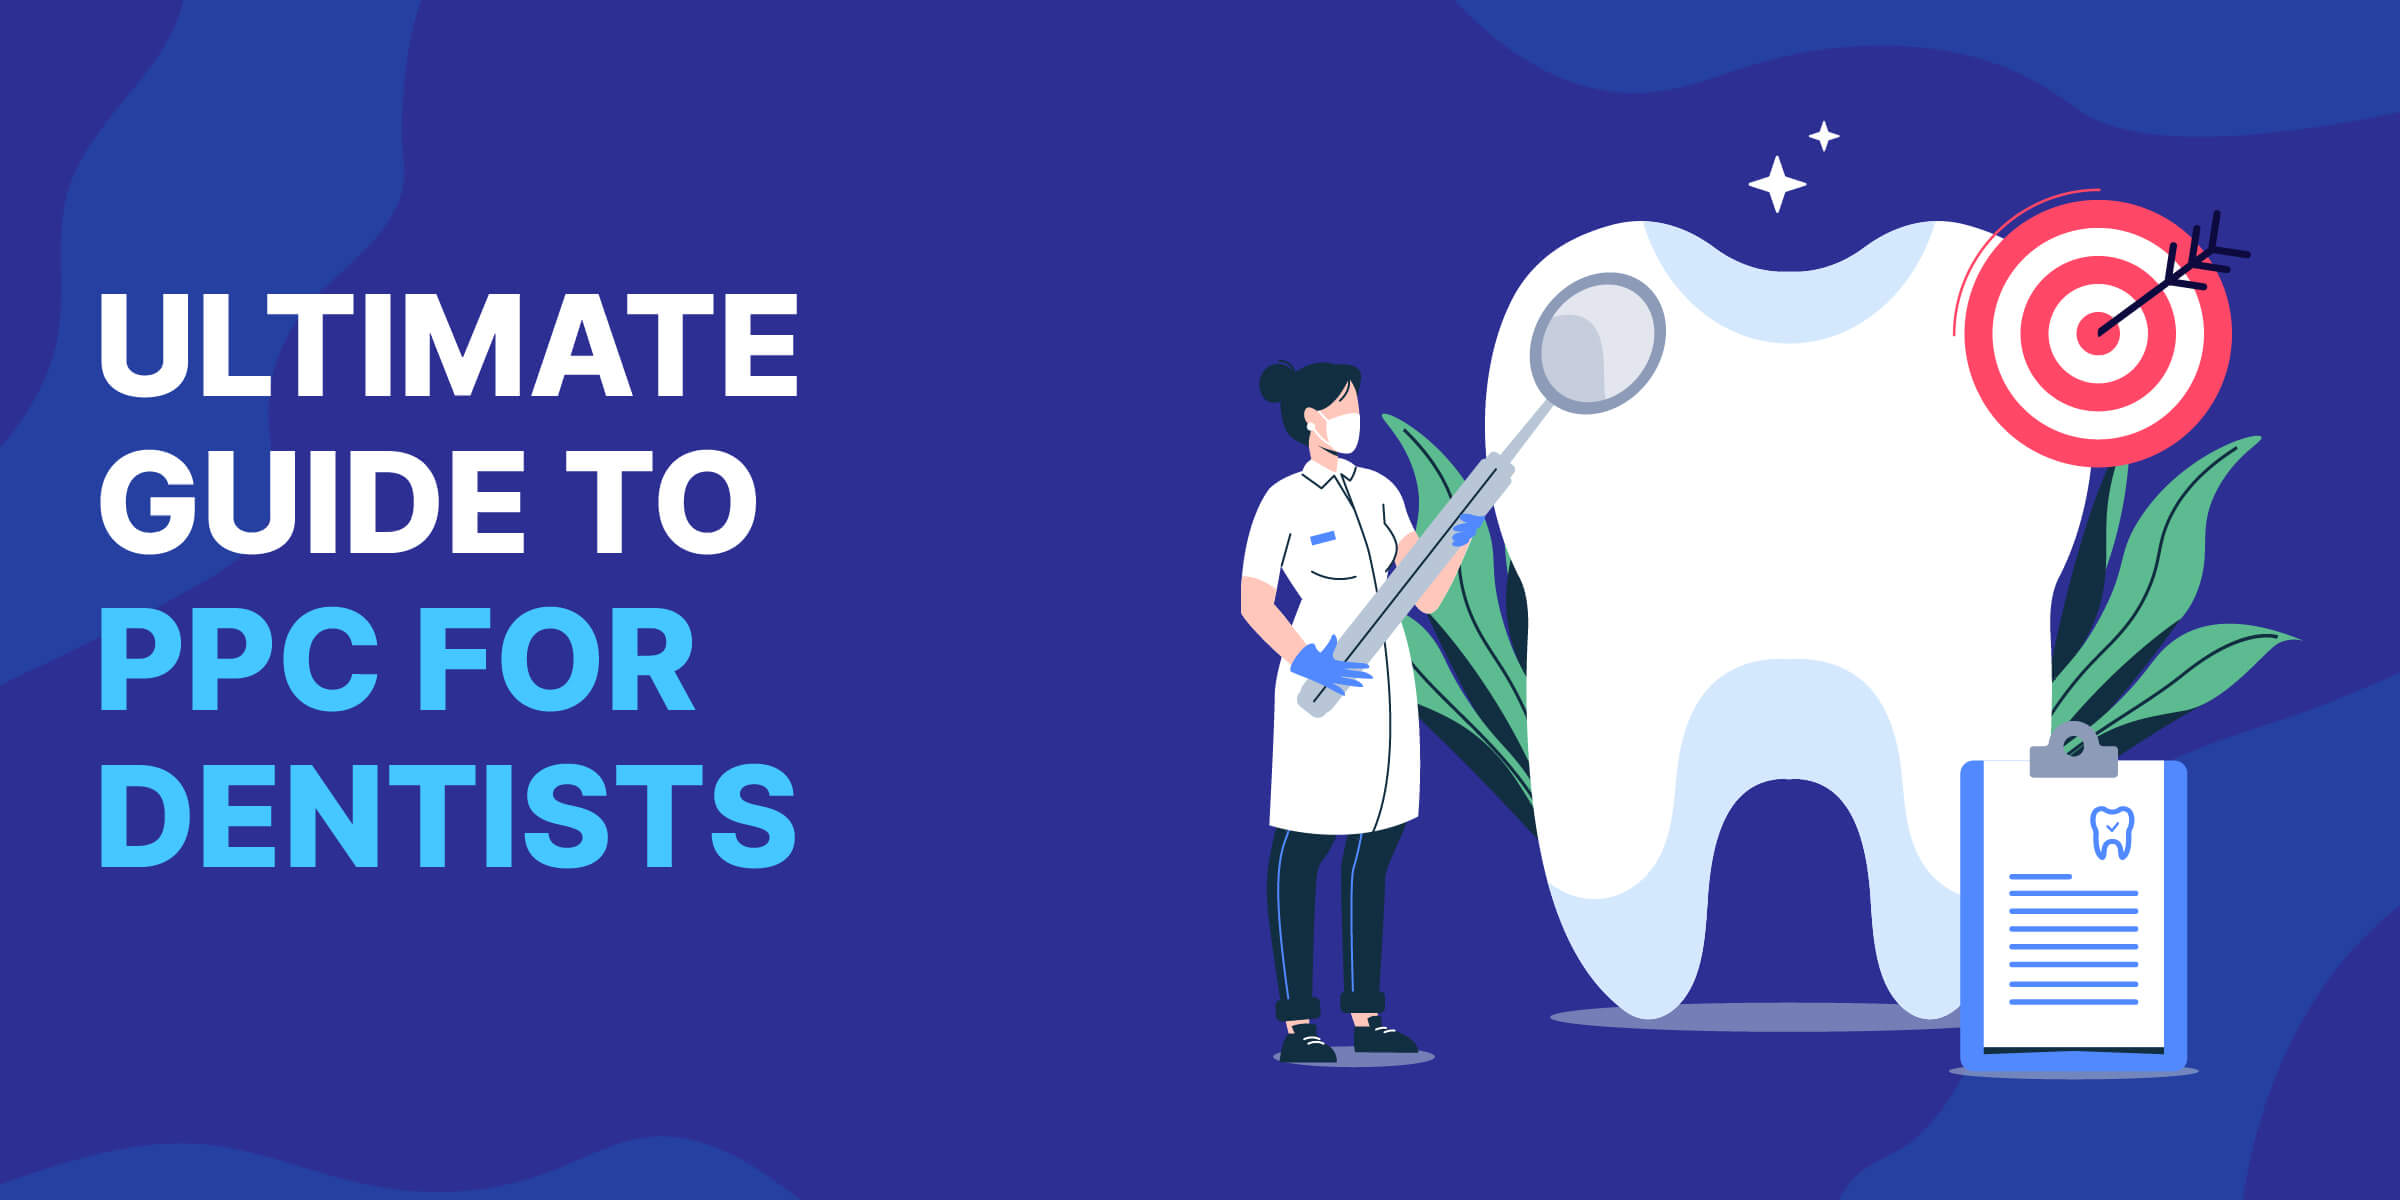 PPC for Dentists Guide